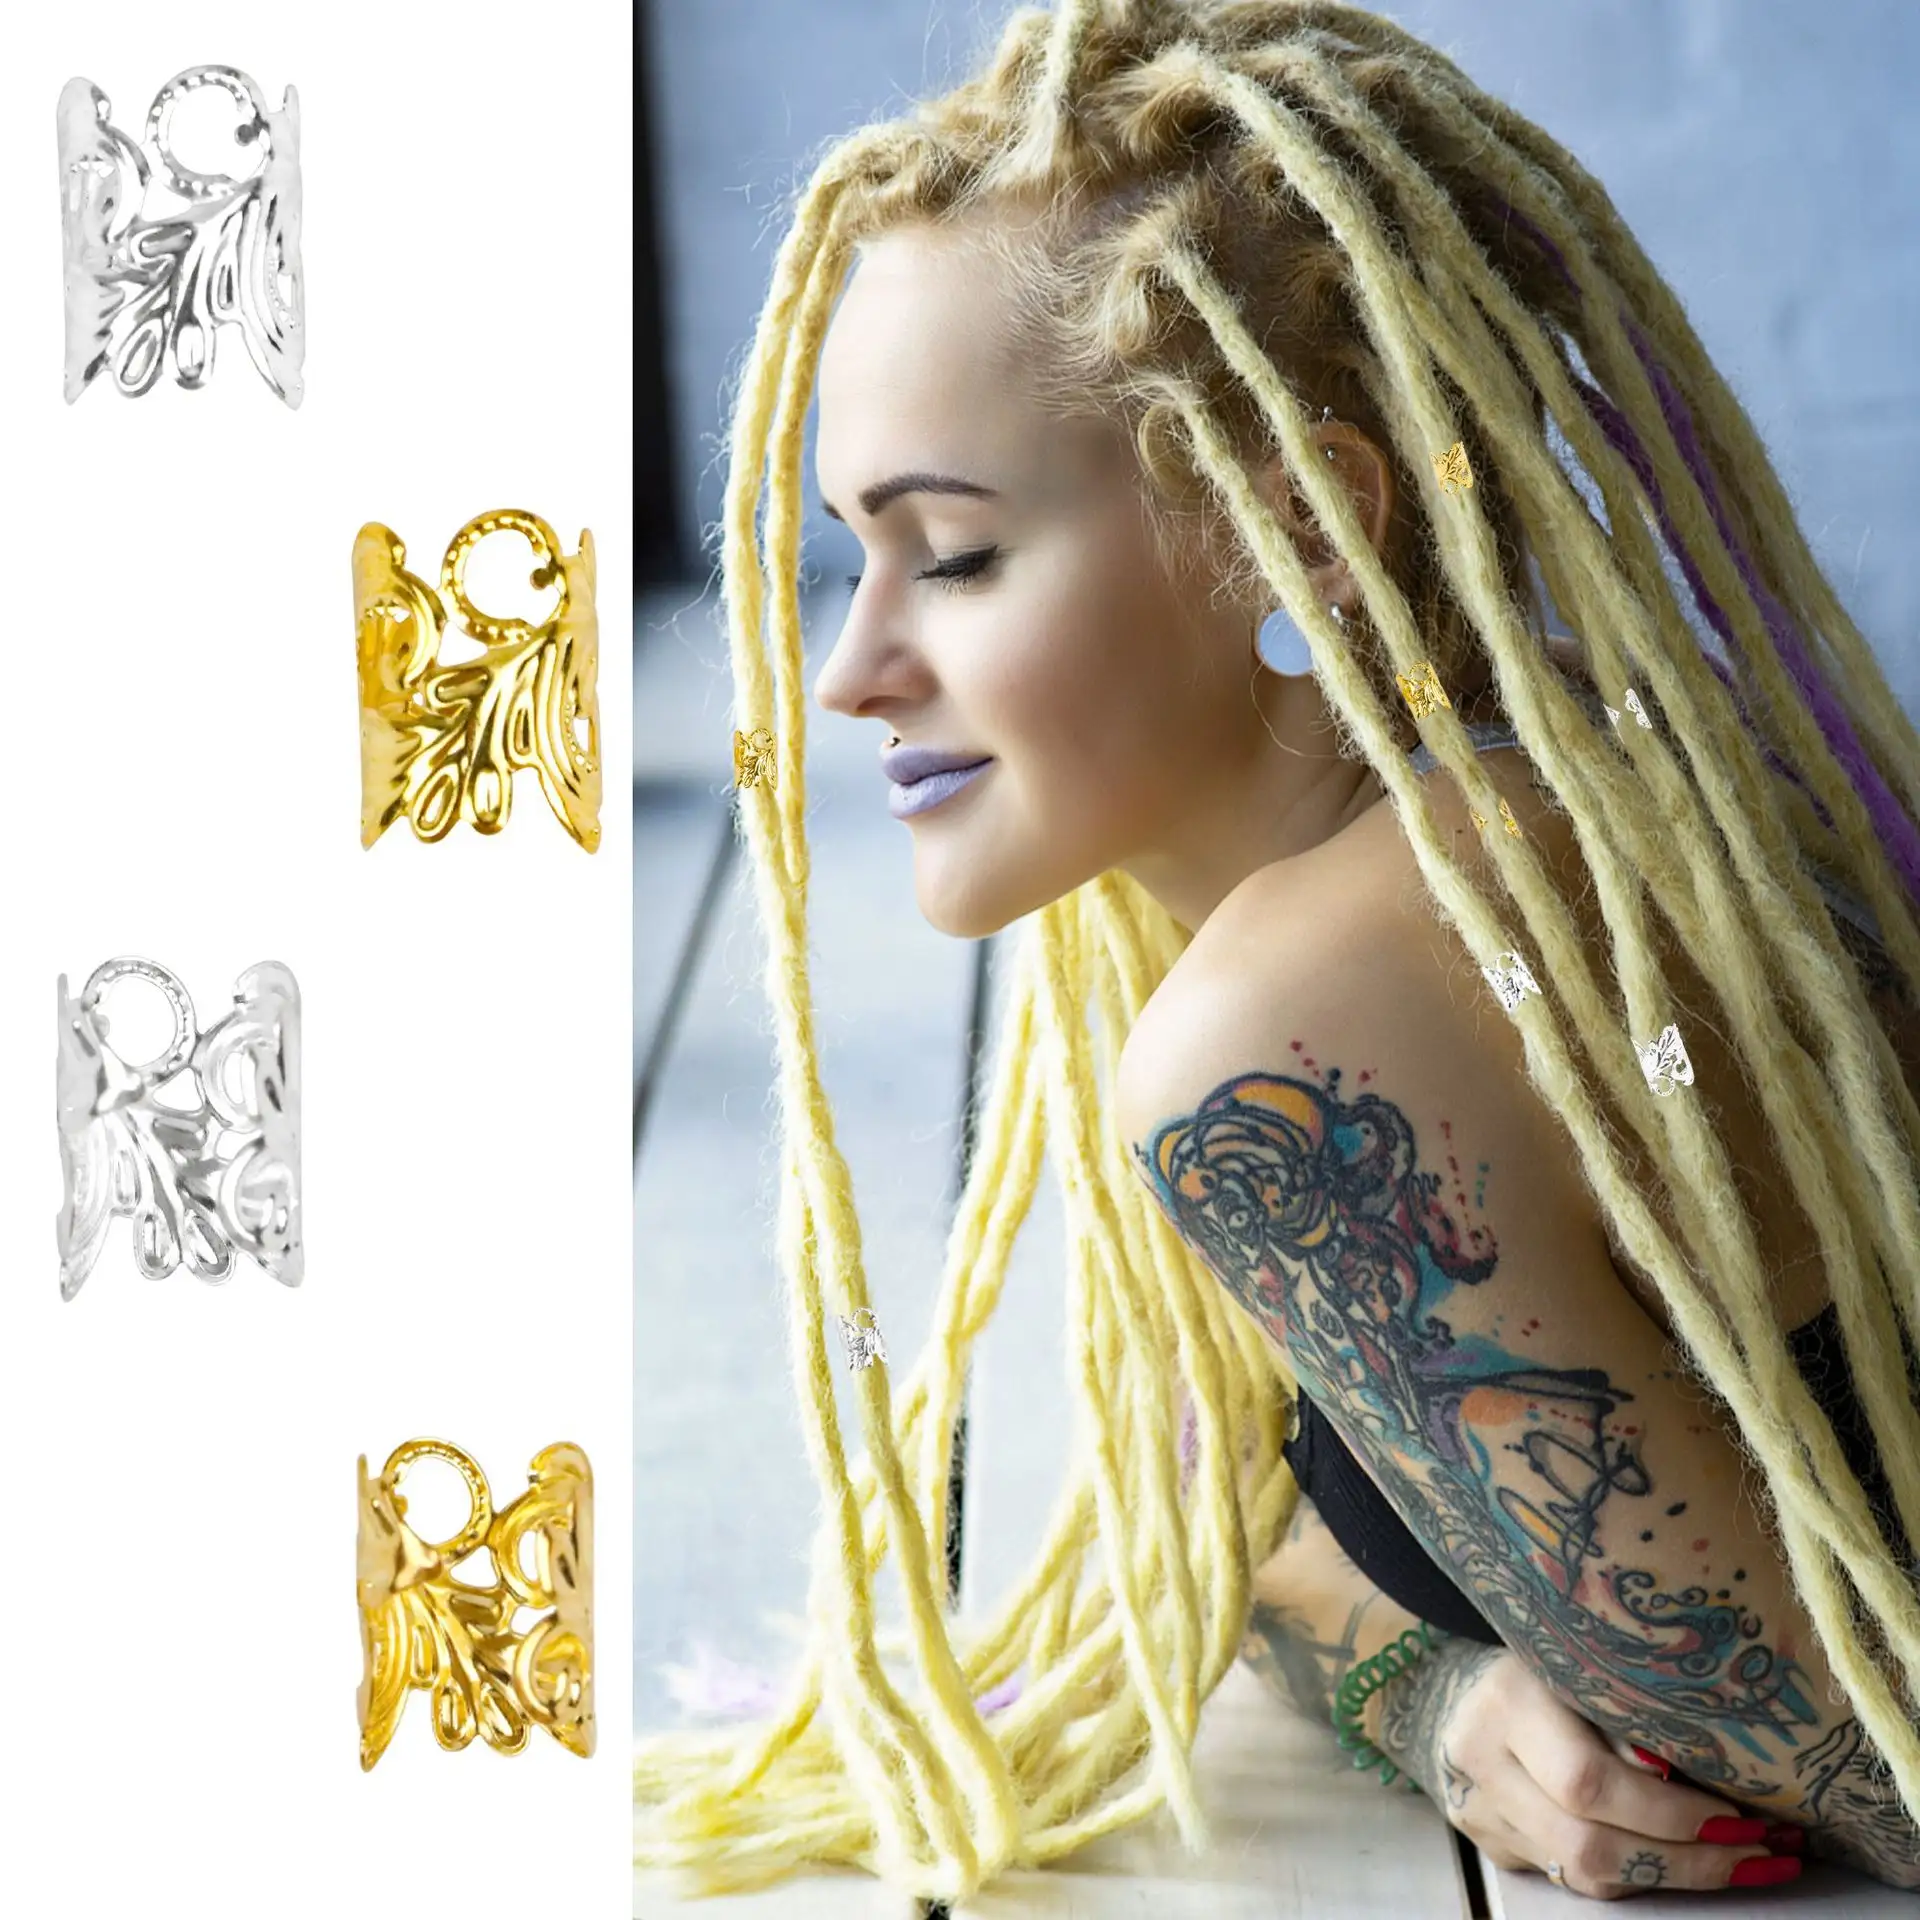 Wholesale Price Loc Jewelry Braid Crochet Accessories Wooden Hair Beads Jewelry For Braids African Hair Jewelry For Dreadlock